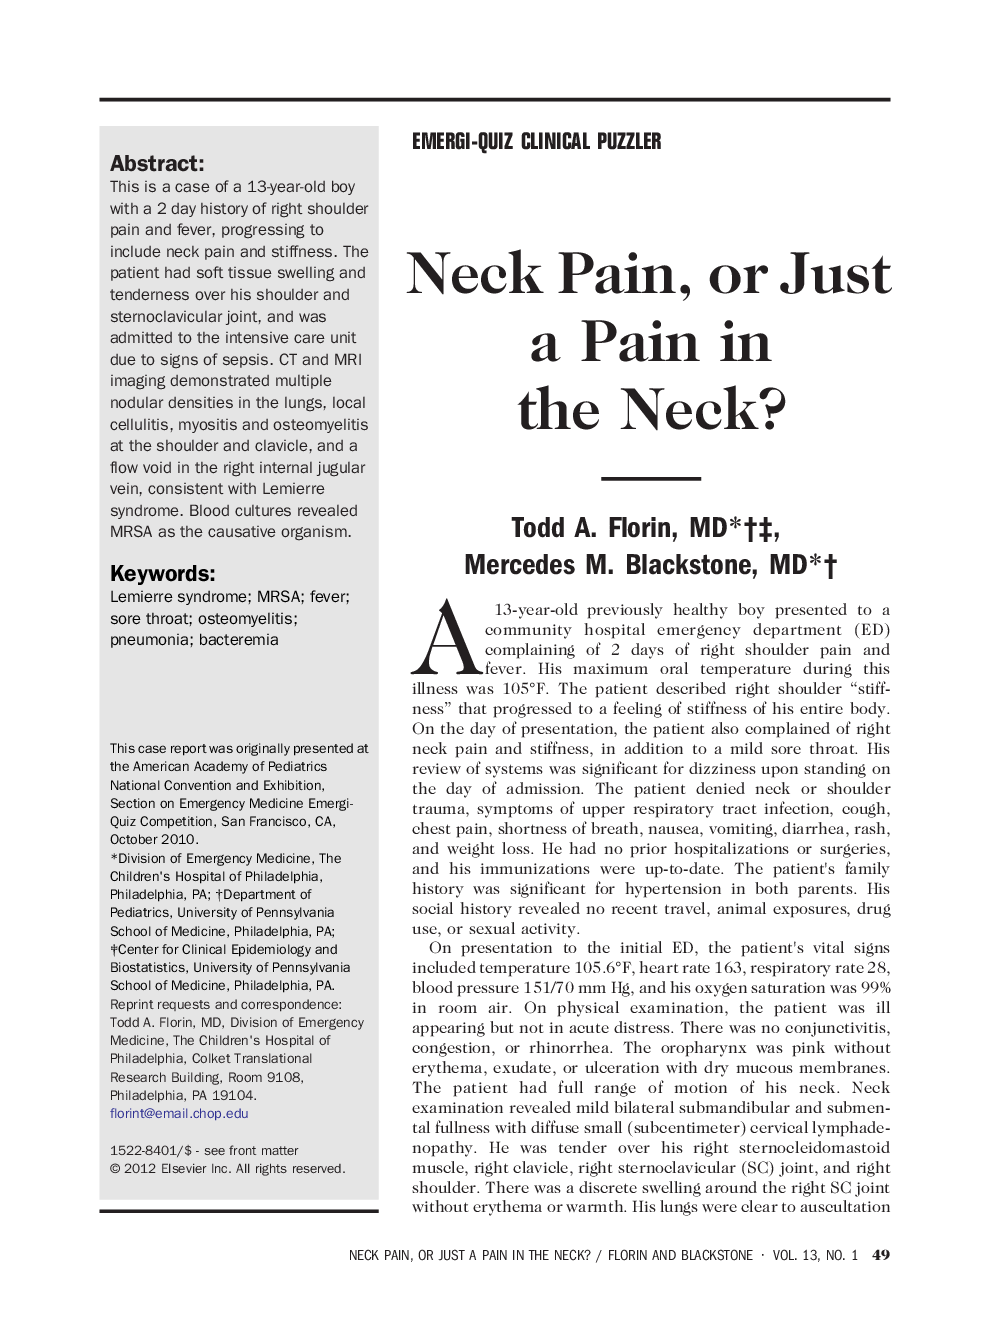 Neck Pain, or Just a Pain in the Neck? 